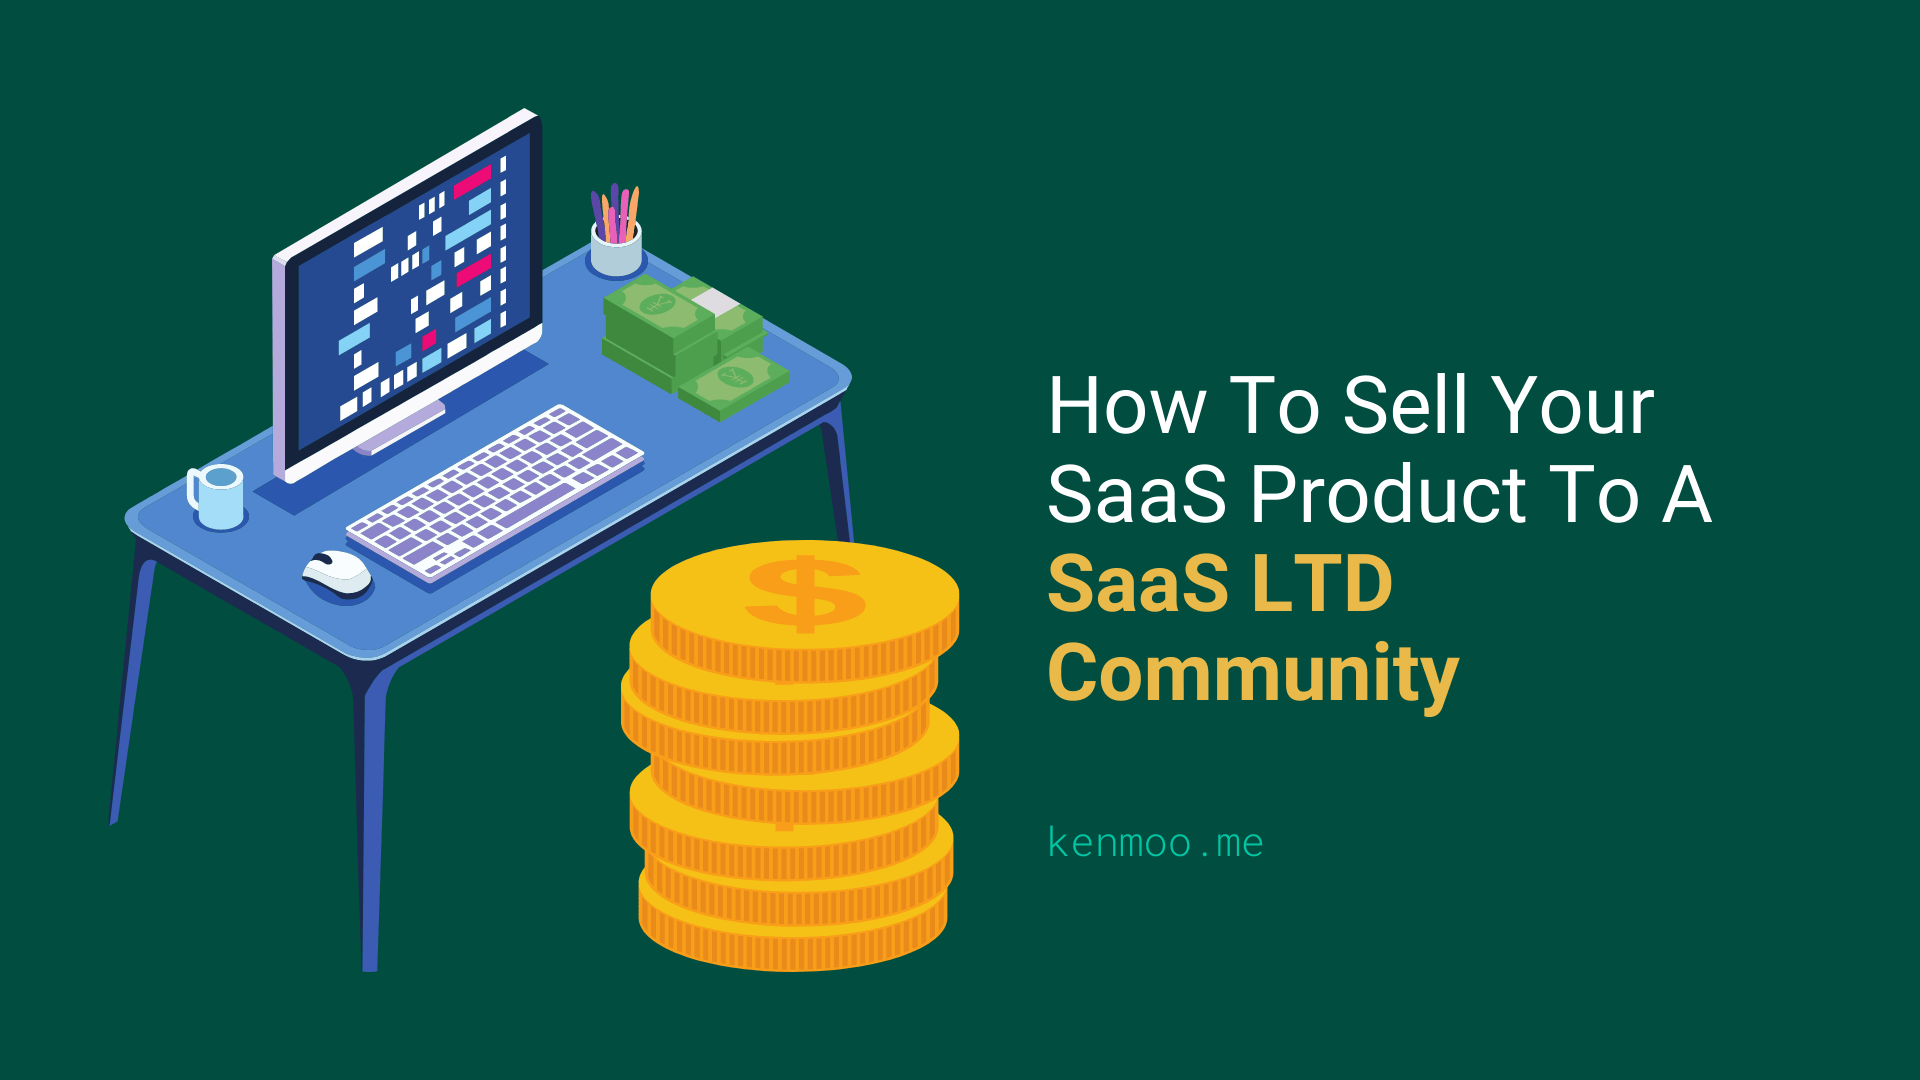 How To Sell Your SaaS Product To A SaaS LTD Community